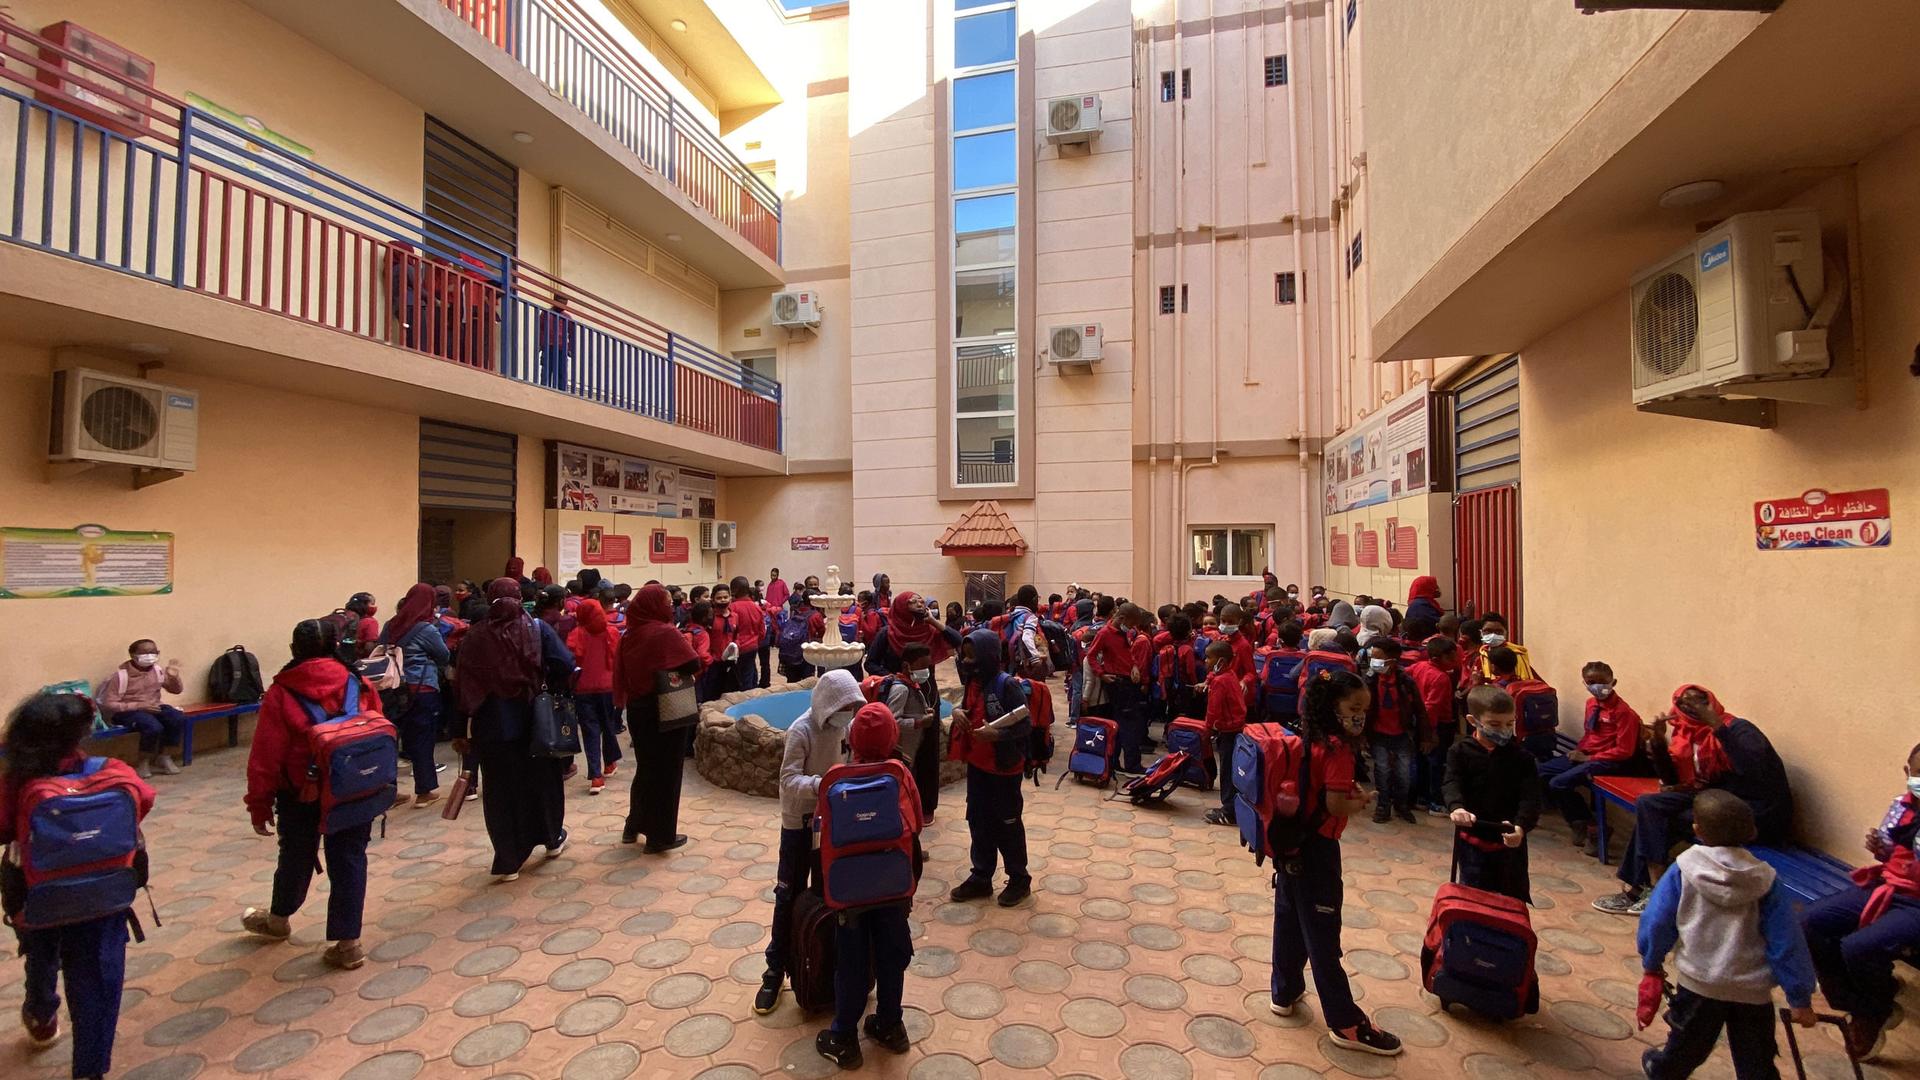 A large crowd of young students are shown wearing backpacks and walking in a courtyard with tan-colored buildings on three sides.